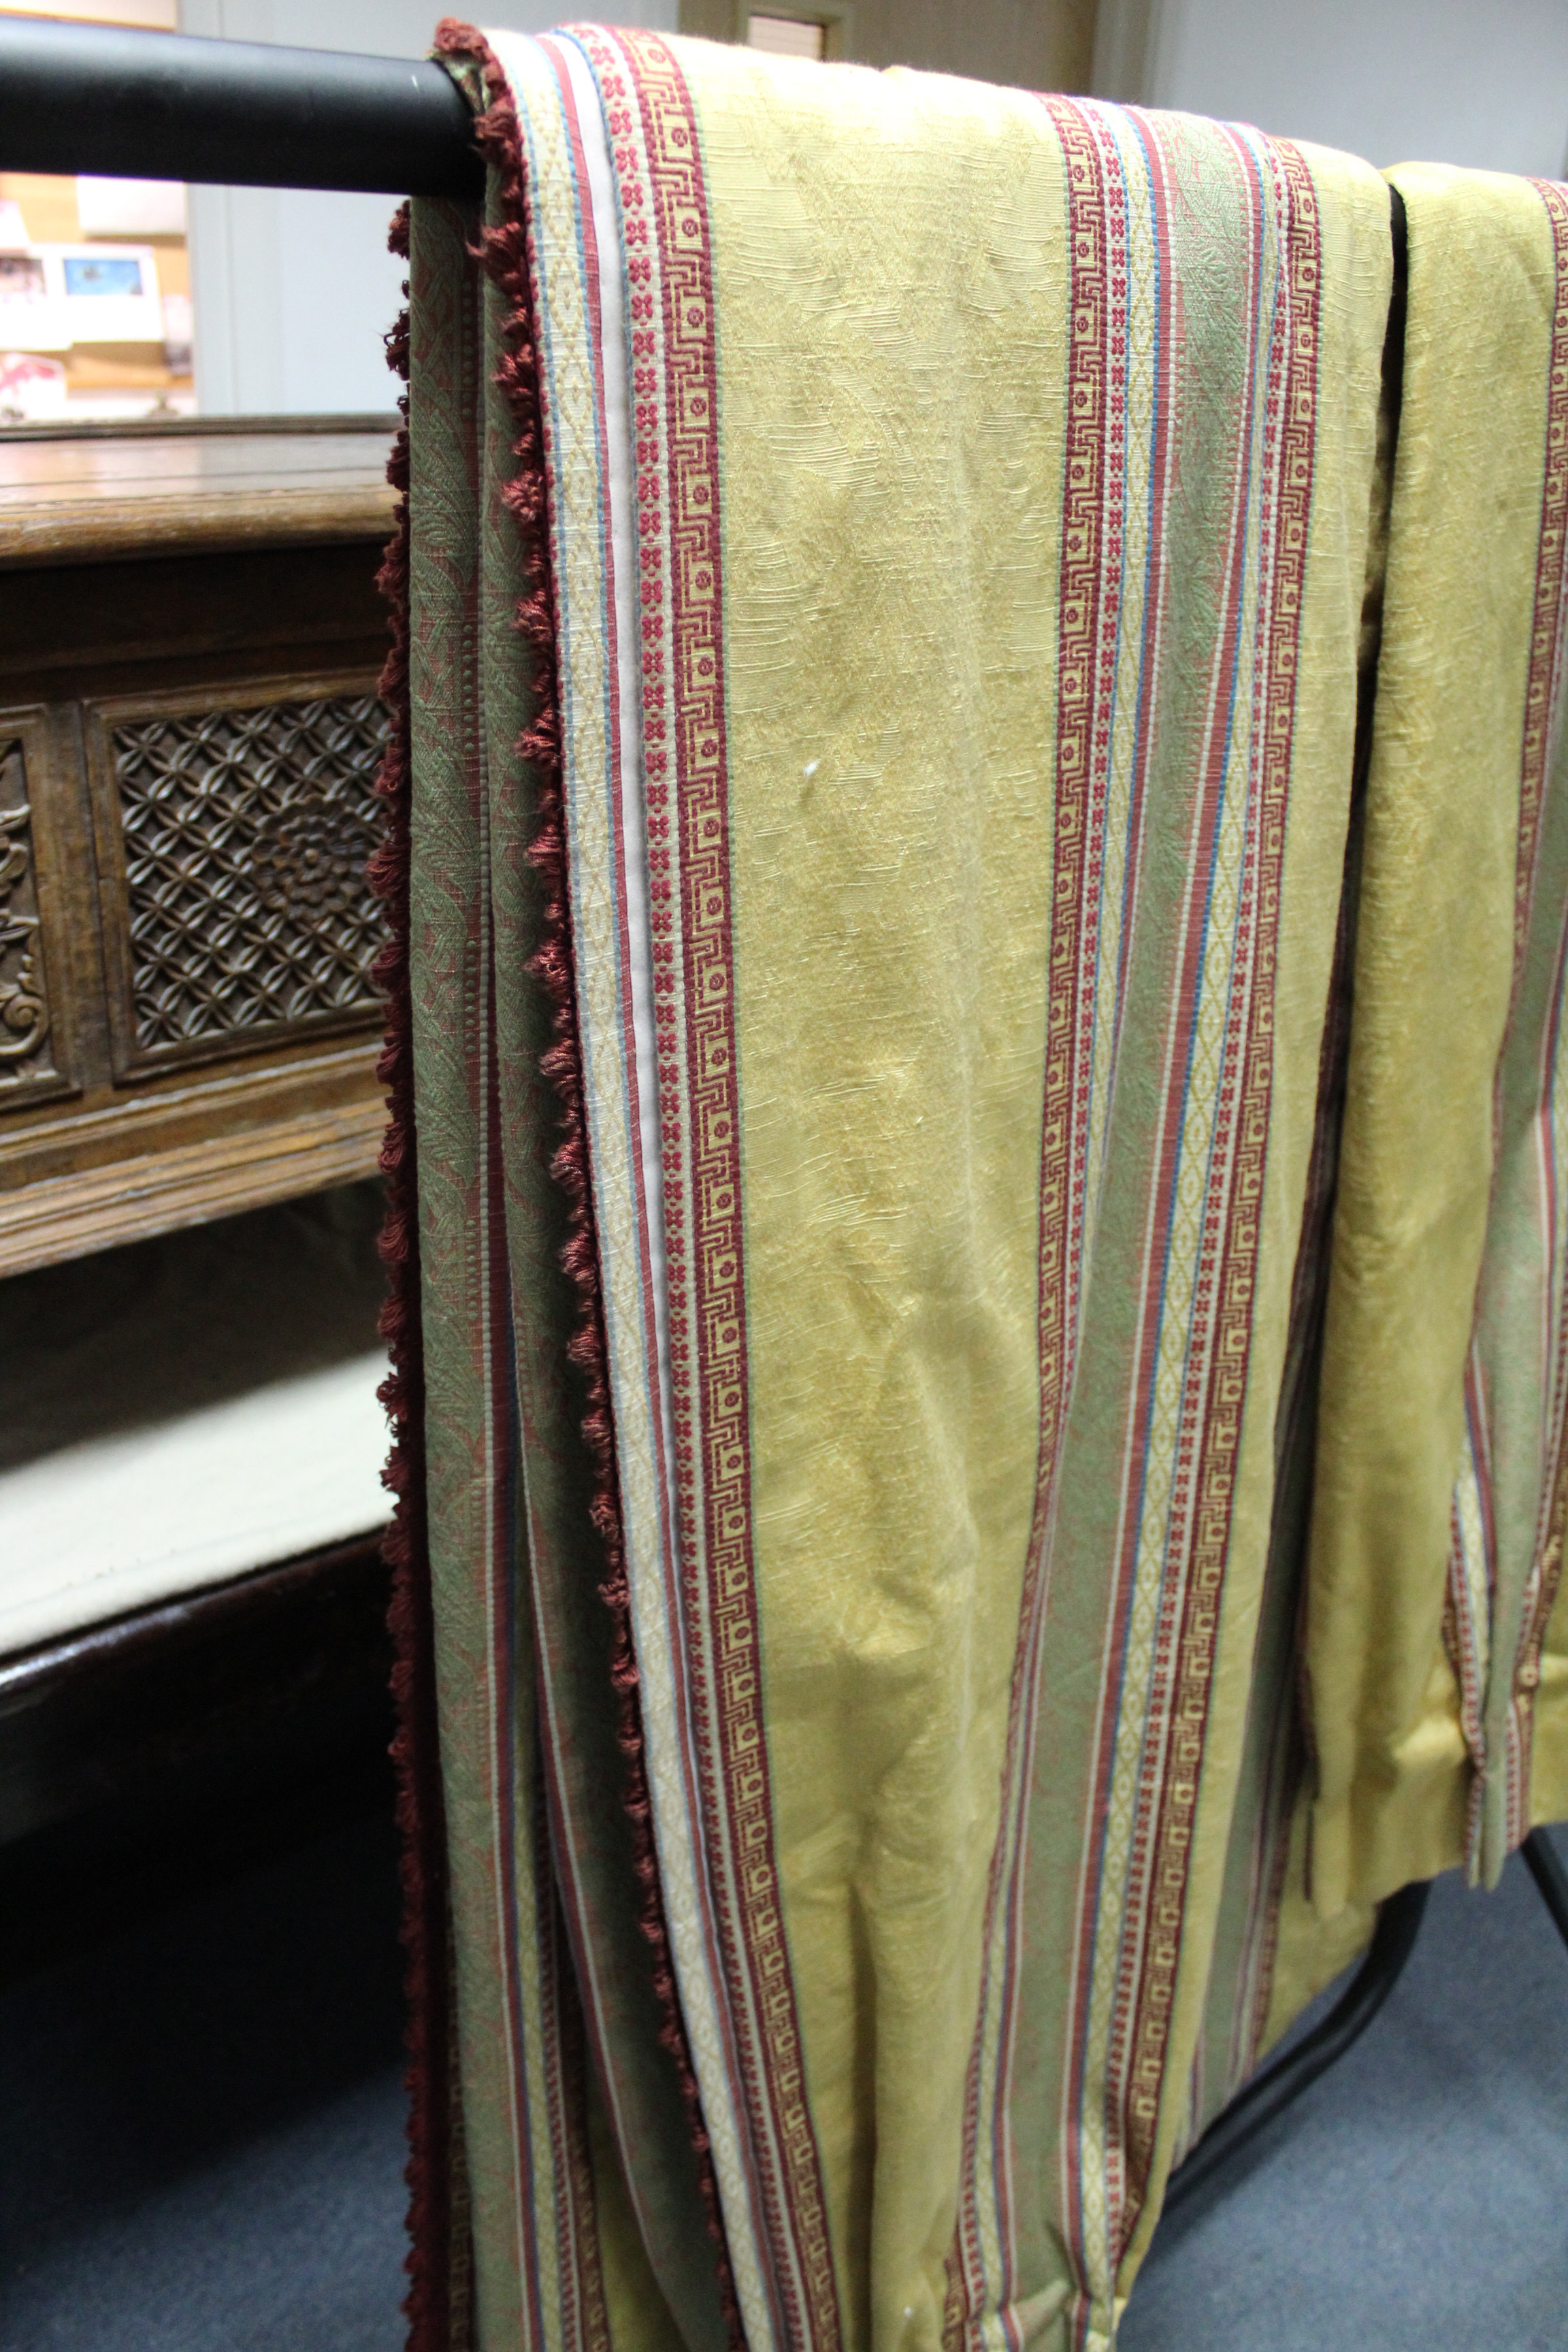 A pair of old gold & crimson damask lined &interlined curtains with floral design & striped - Image 3 of 5